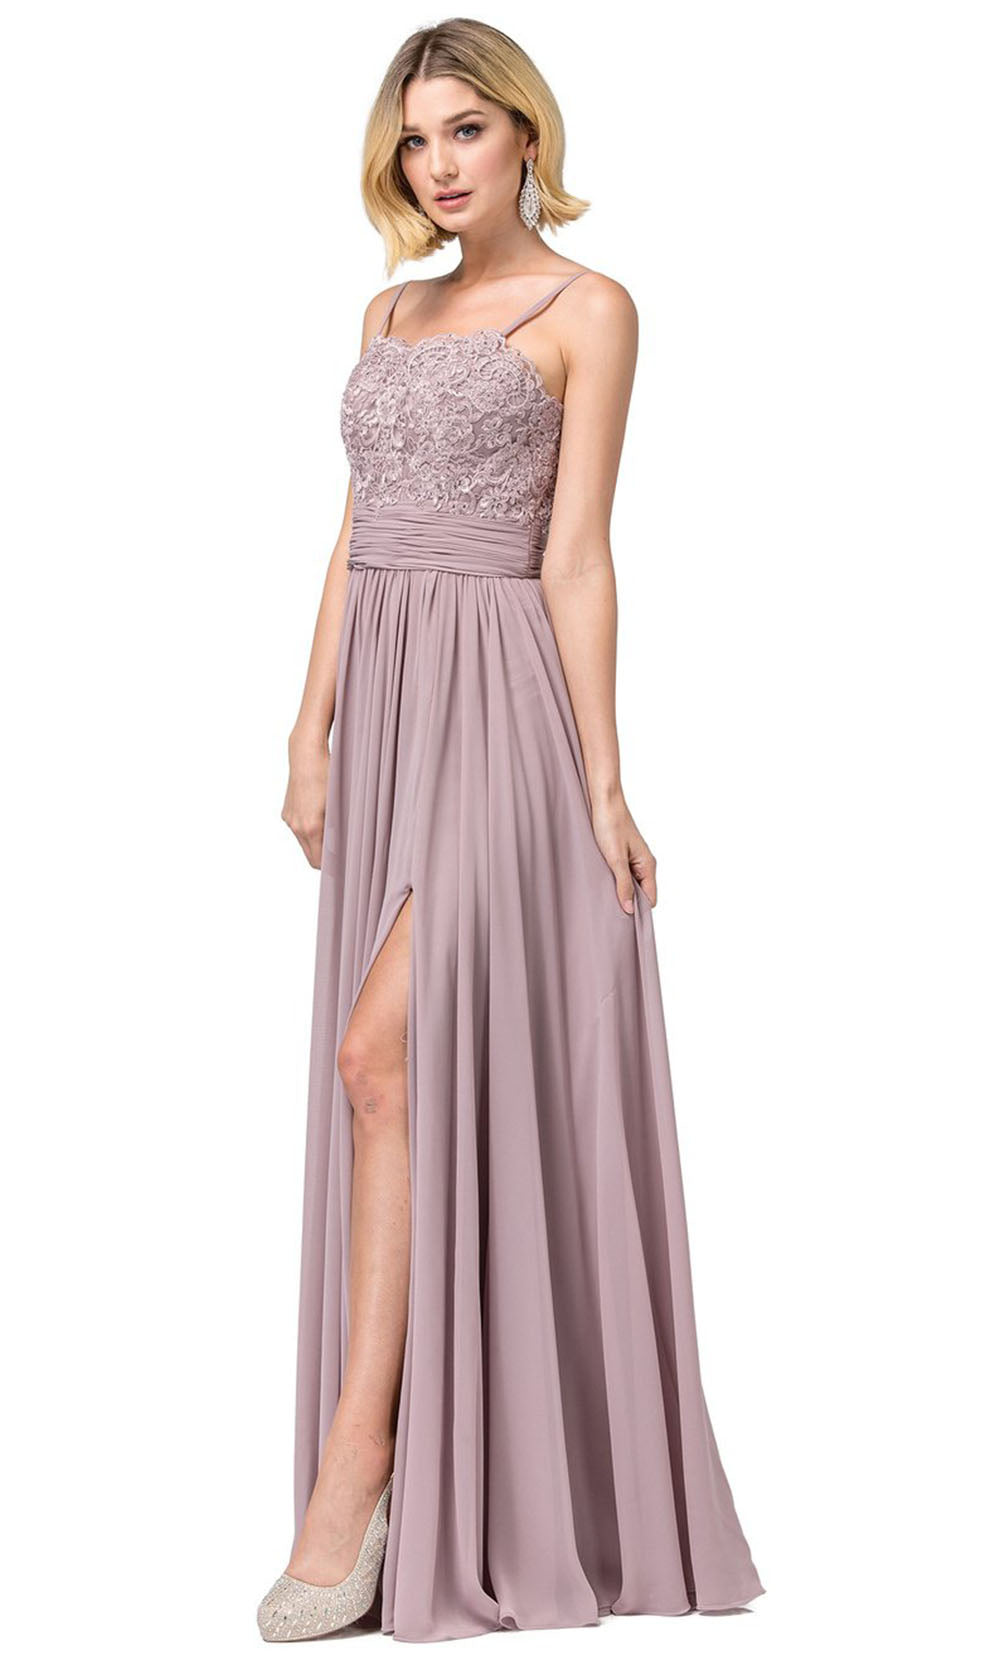 Dancing Queen - 2789 Sleeveless Lace Bodice Slit A-Line Gown In Brown